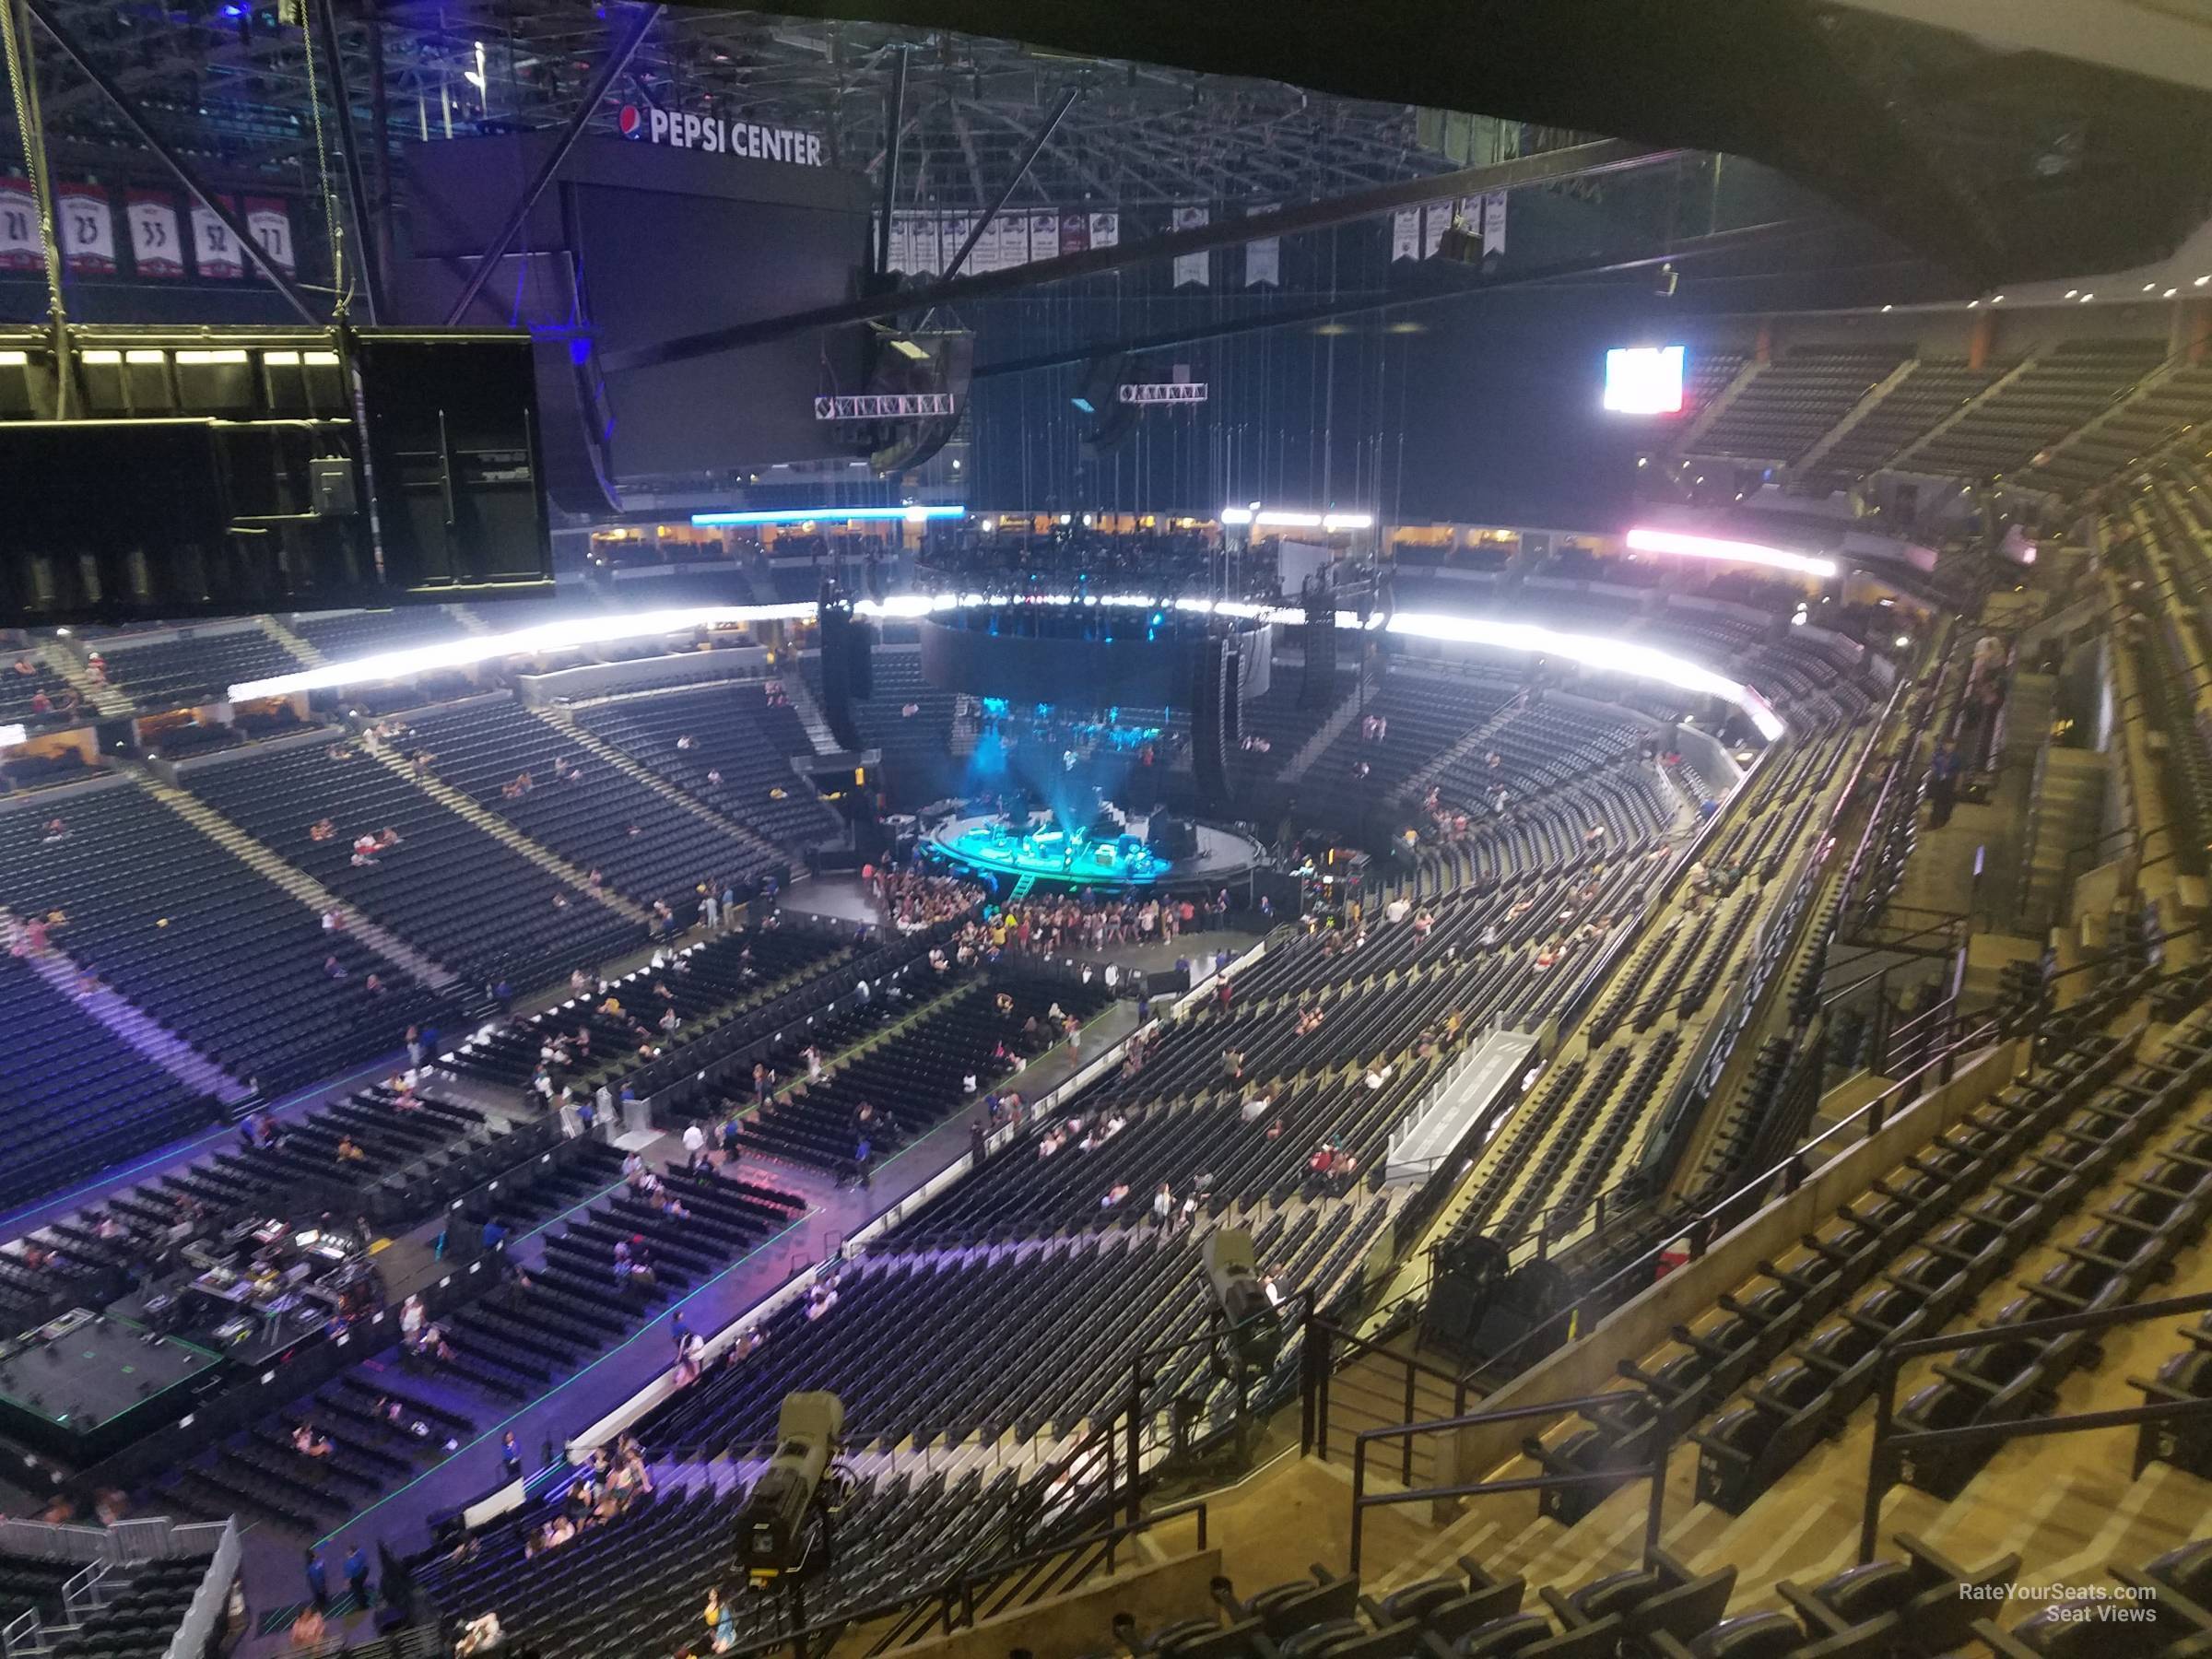 section 312, row 13 seat view  for concert - ball arena